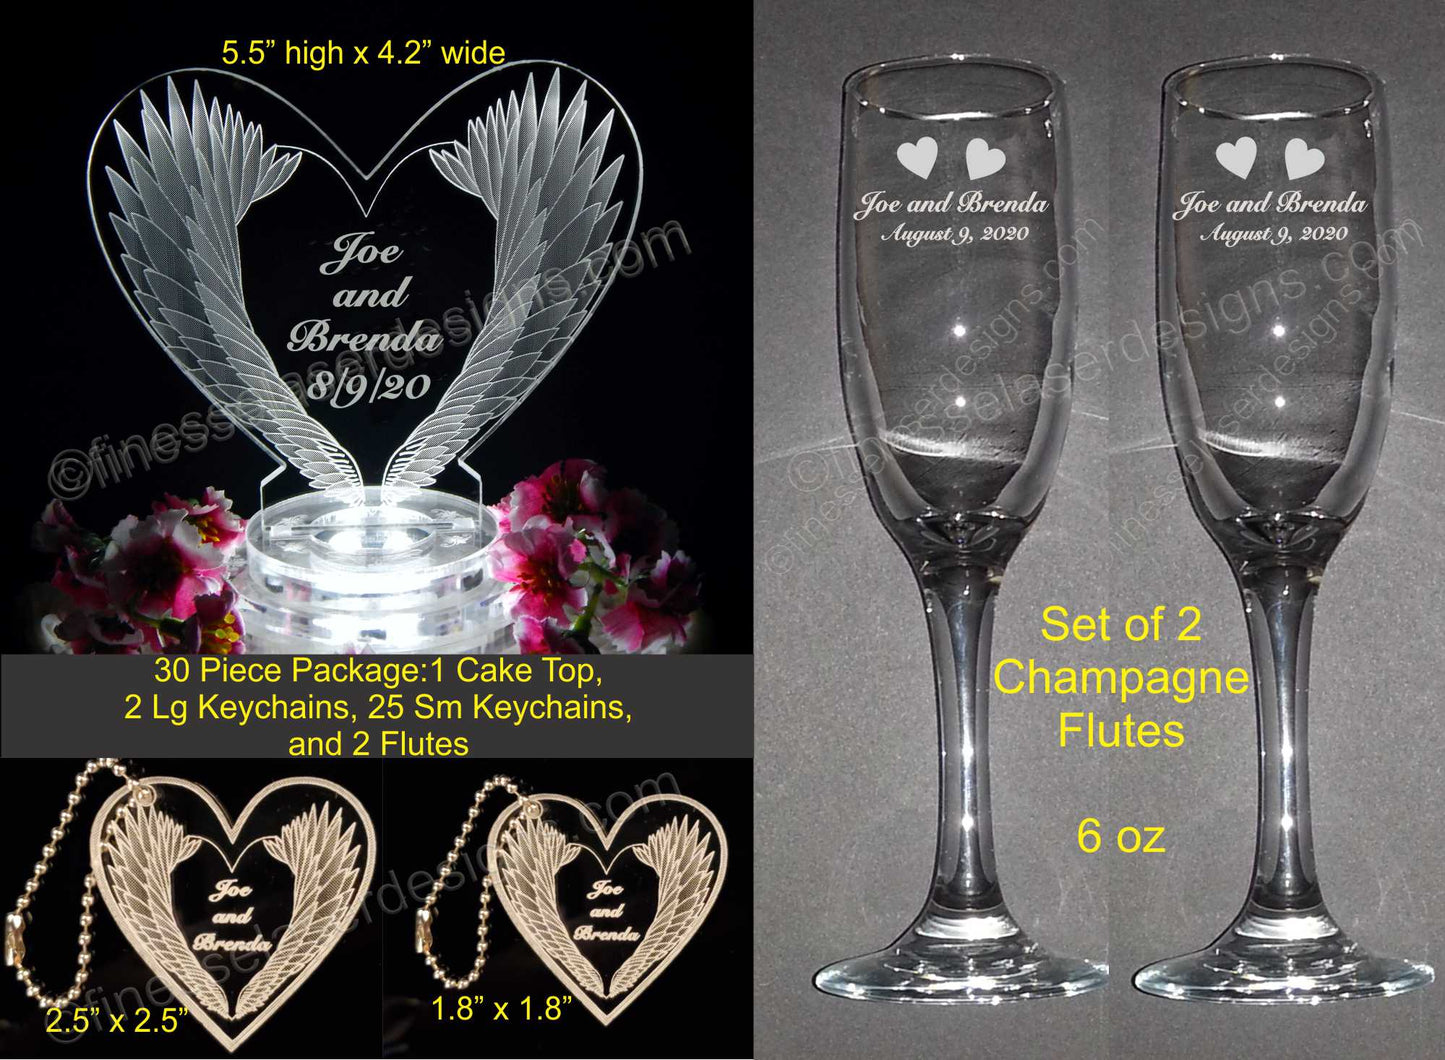 photo showing package that includes heart shaped acrylic cake topper with feather wing design, two sizes of acrylic keychain favors and a set of two champagne flutes with dimensions and information